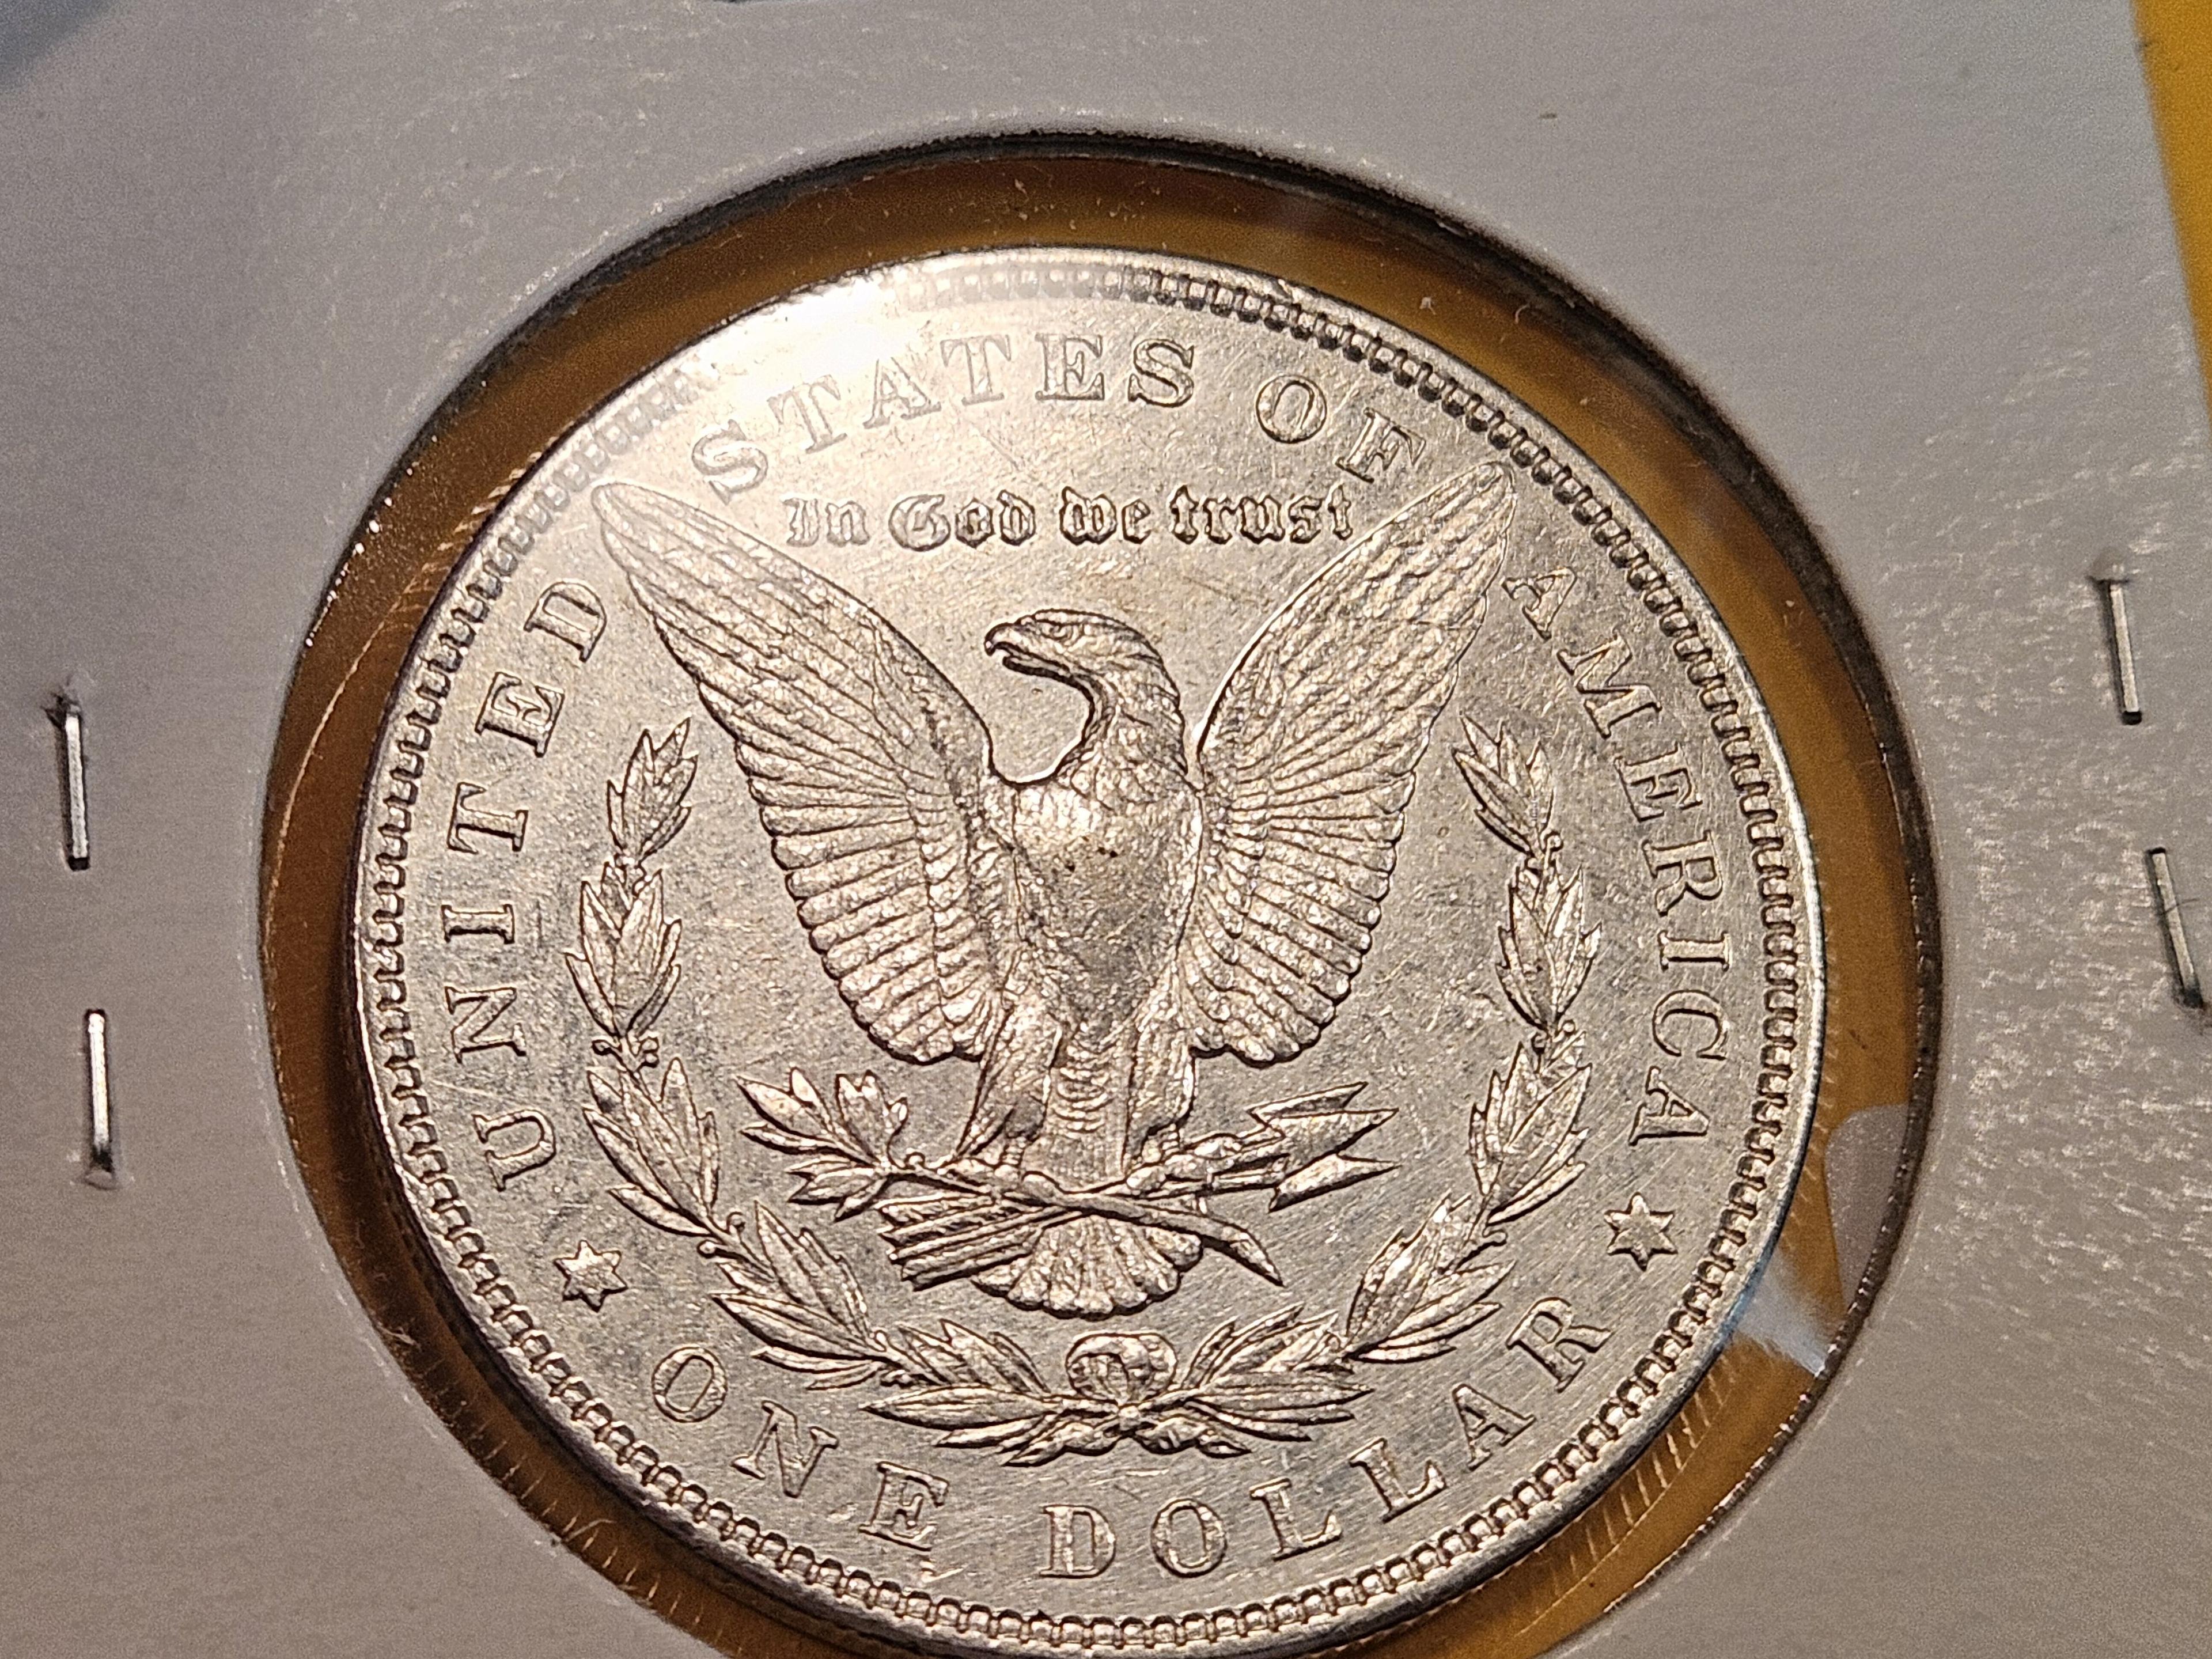 *** KEY DATE *** 1893 Morgan Dollar in Brilliant About Uncirculated Plus